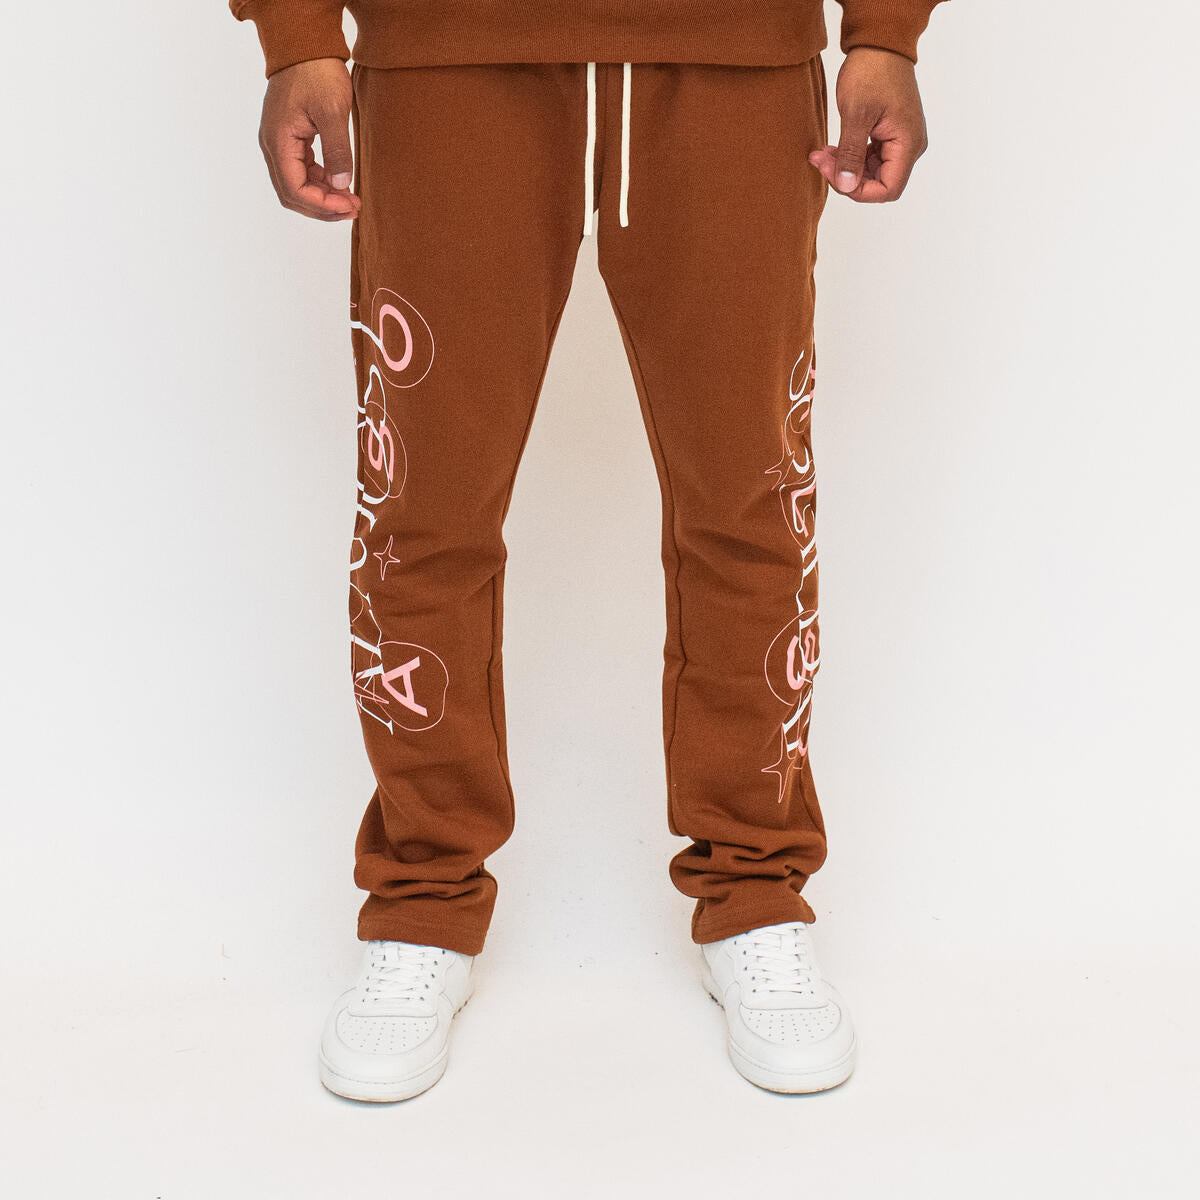 Almost Someday "Fantasy Joggers" (Brown)